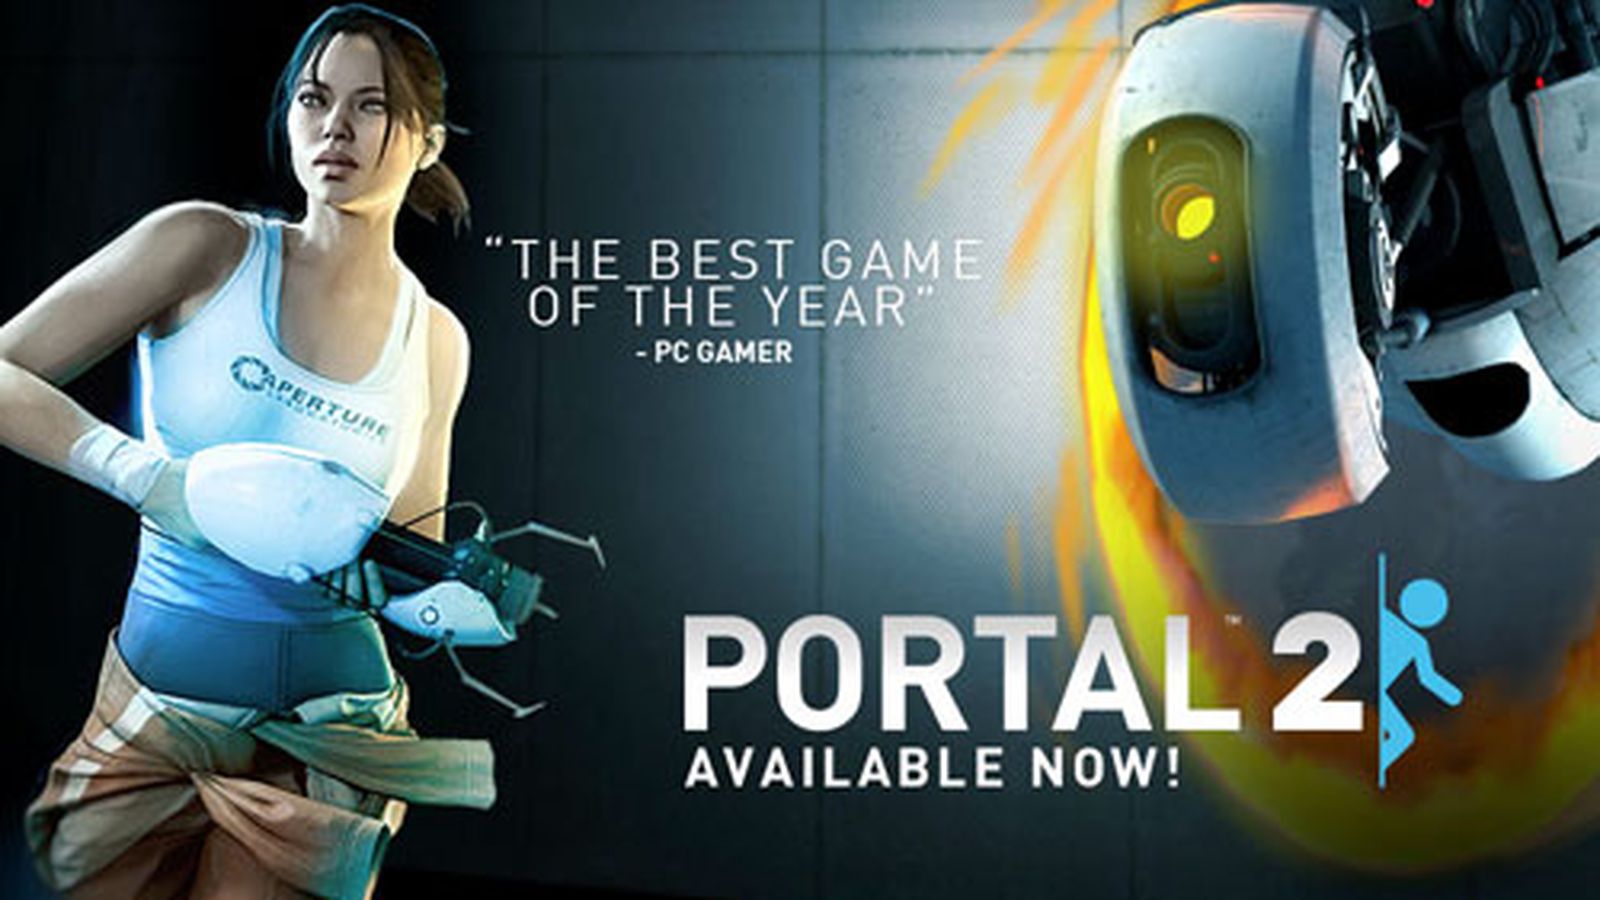 How To Get Portal 2 For Free Mac